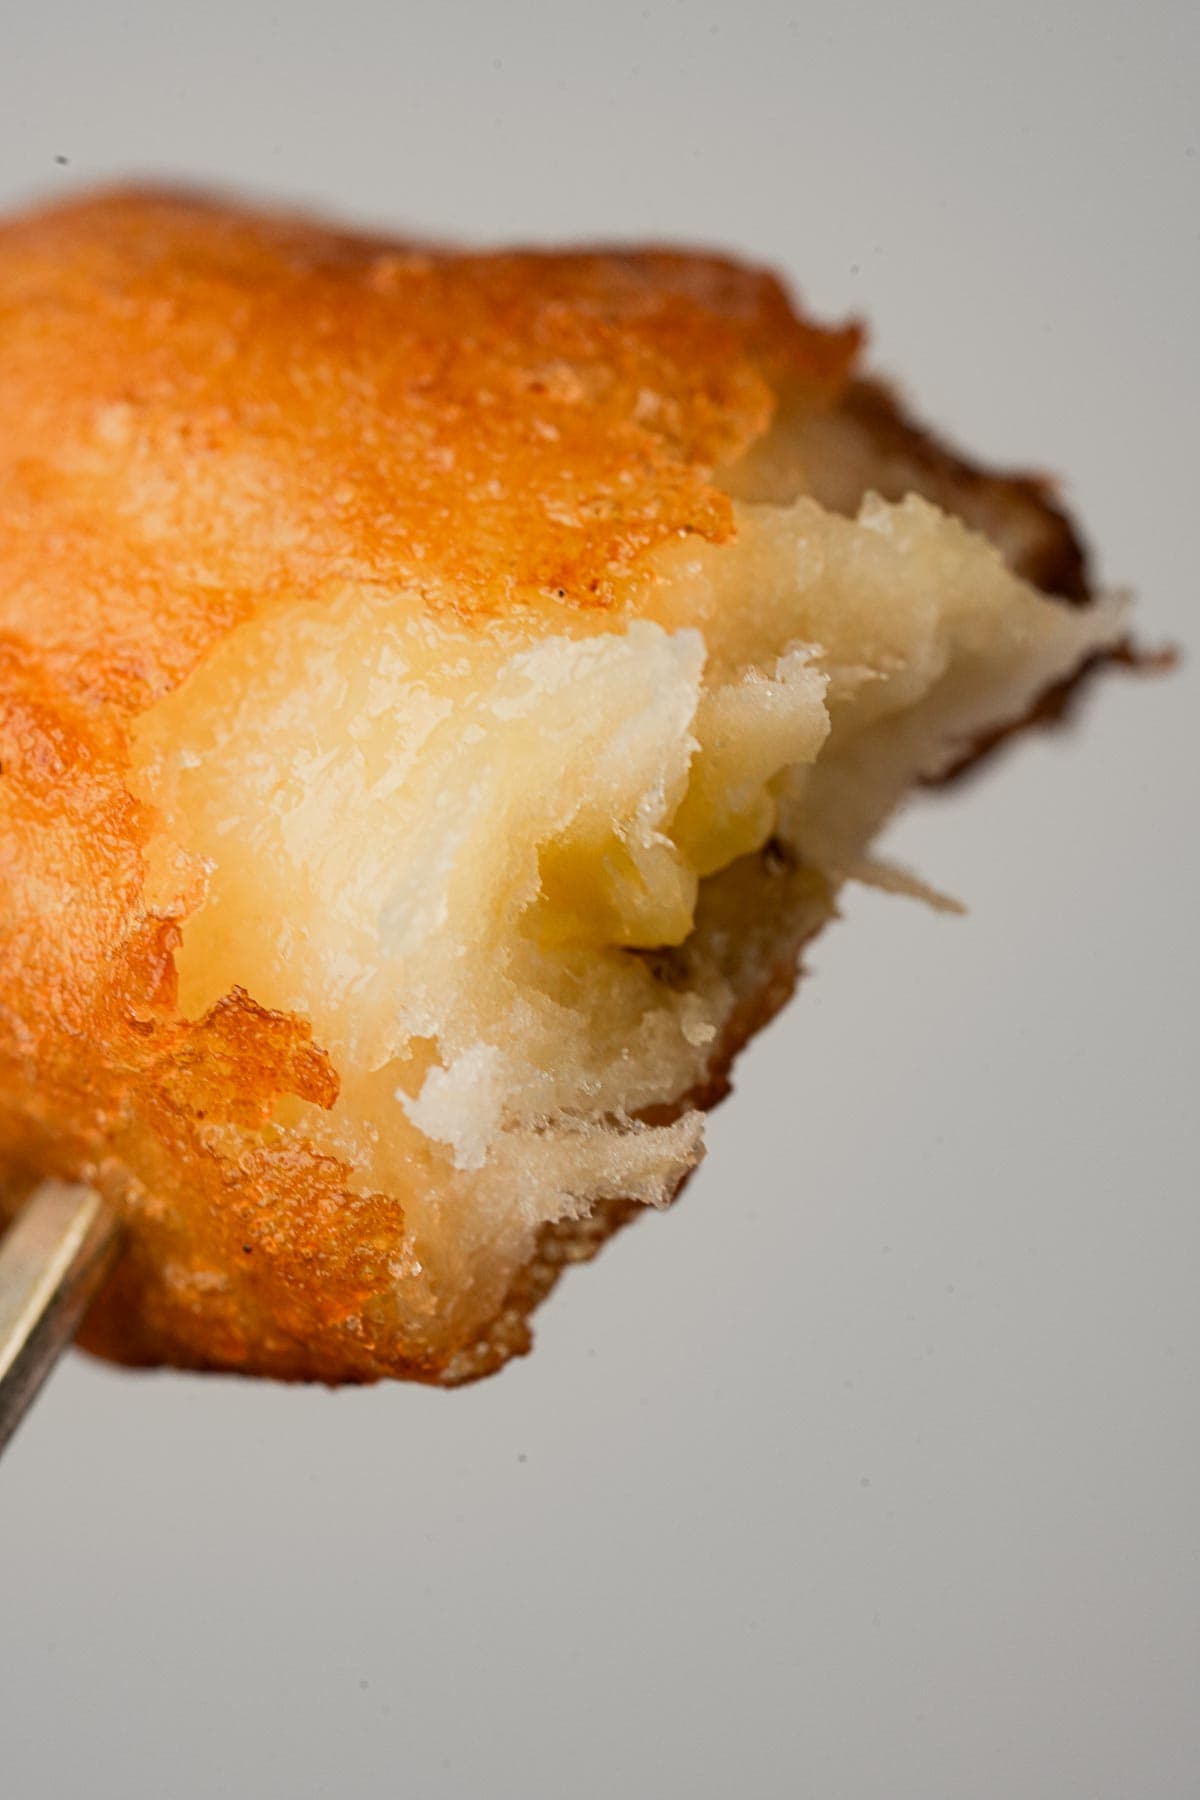 A fork is holding a piece of fried banana. Crispy and golden on the outside and fluffy and tender on the inside.